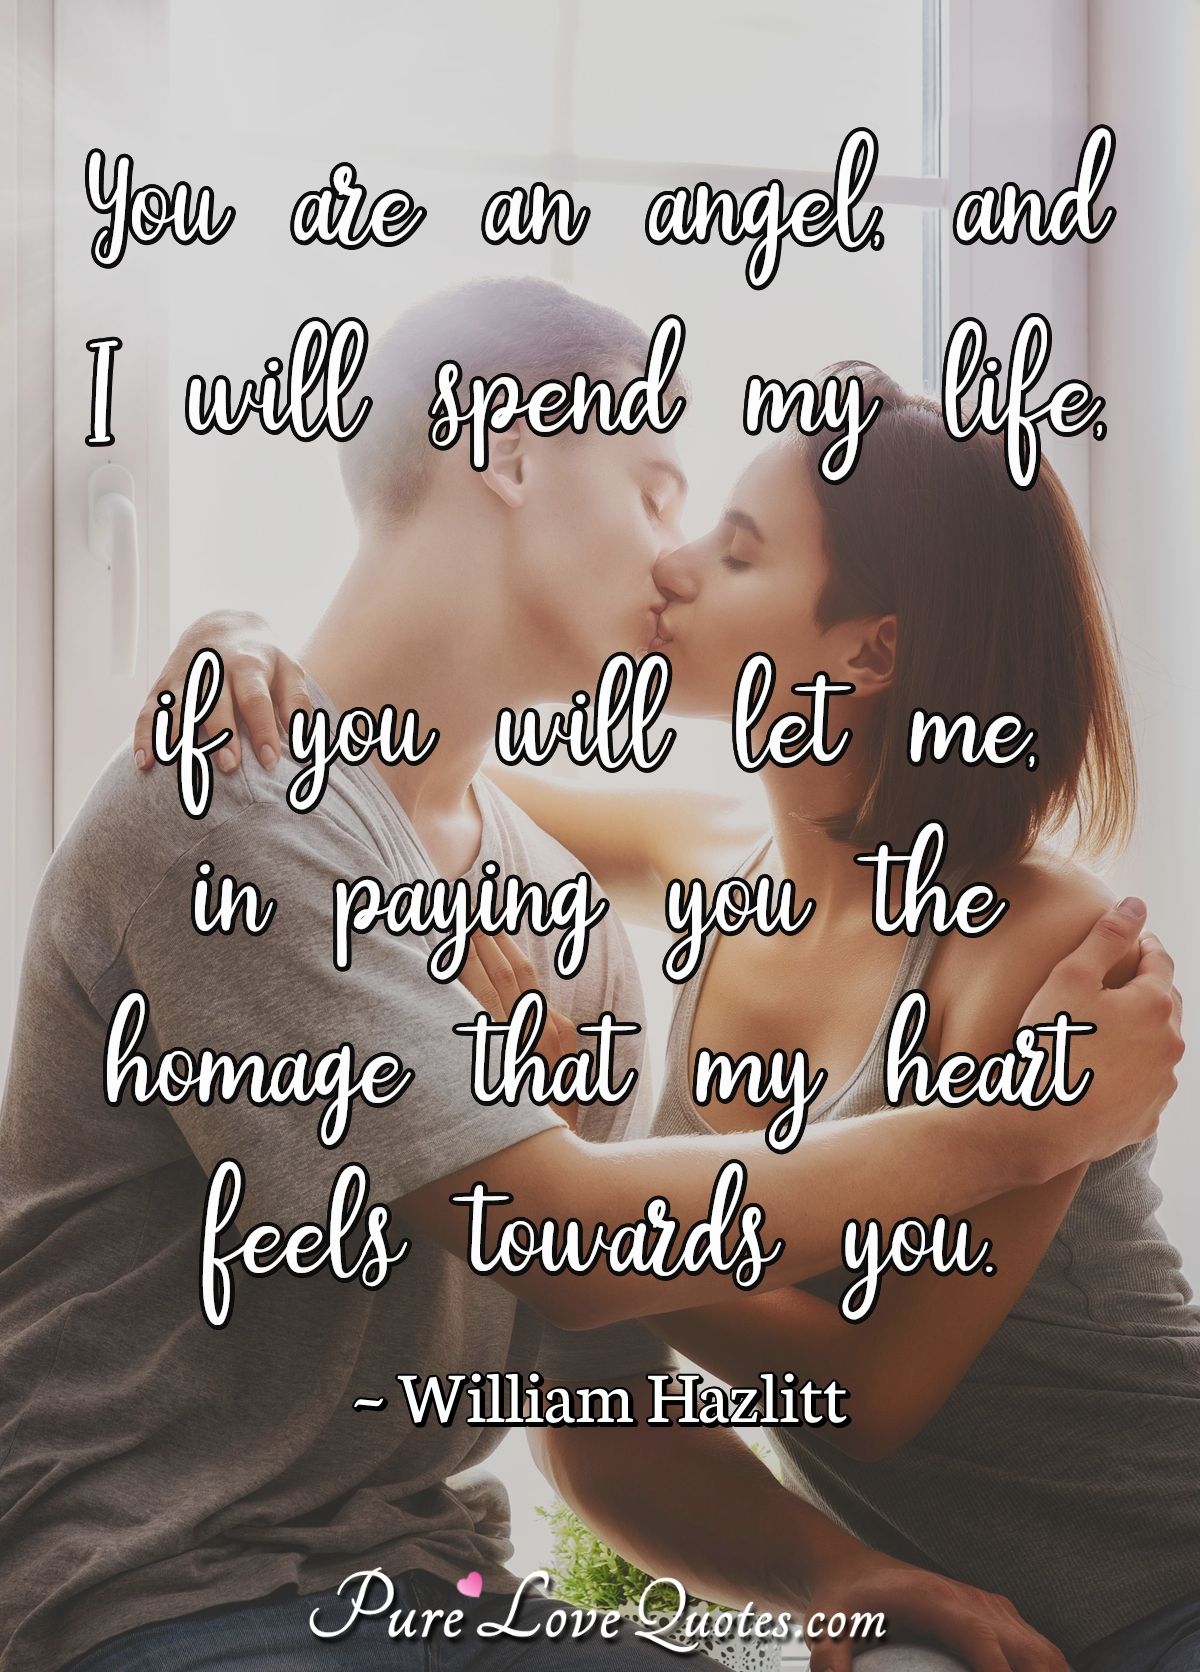 You are an angel, and I will spend my life, if you will let me, in paying you the homage that my heart feels towards you. - William Hazlitt